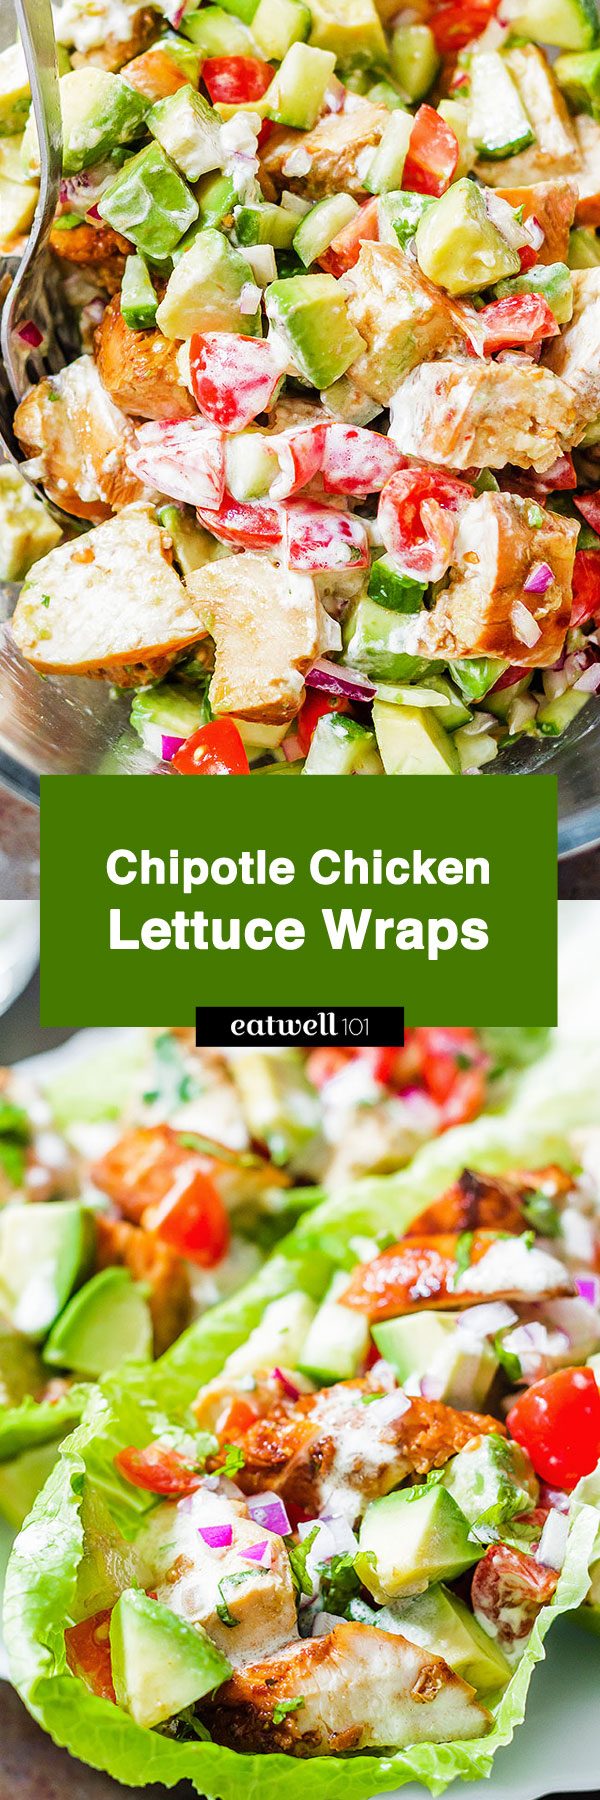 Chicken Lettuce Wraps – Piled with chunky chicken and veggies, makes for a light, yet satisfying dinner.